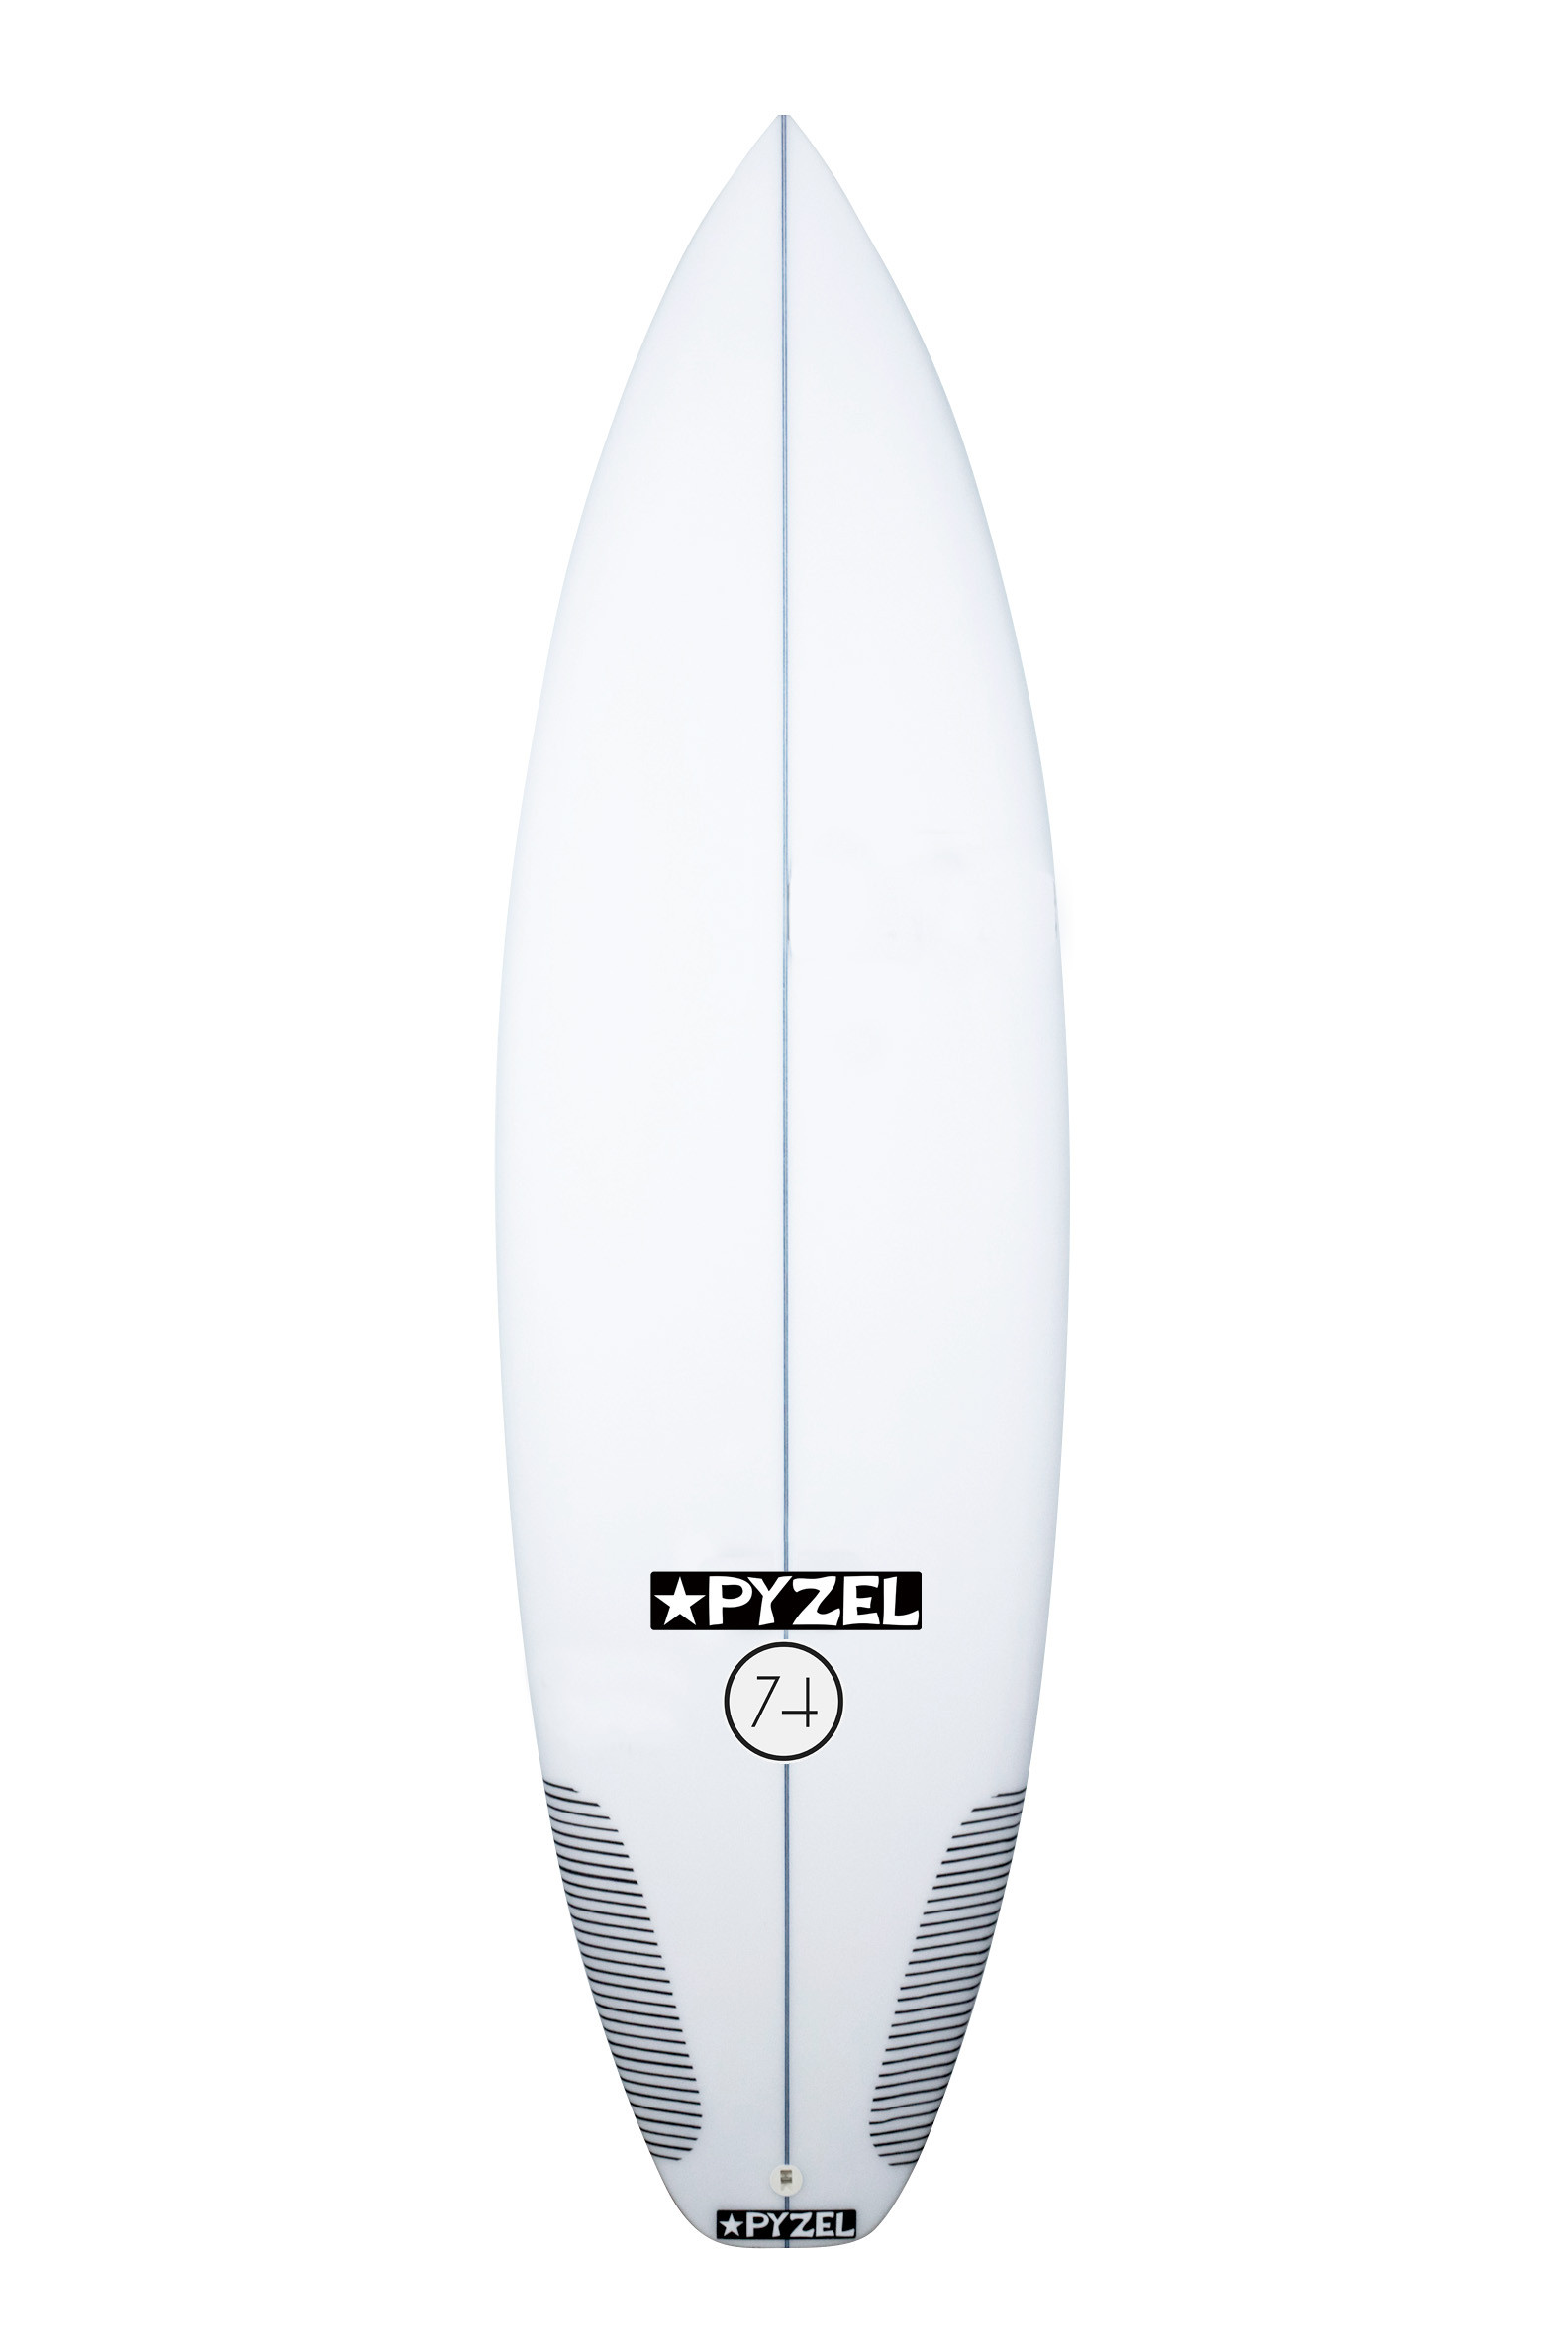 Pyzel Surfboards - Astro